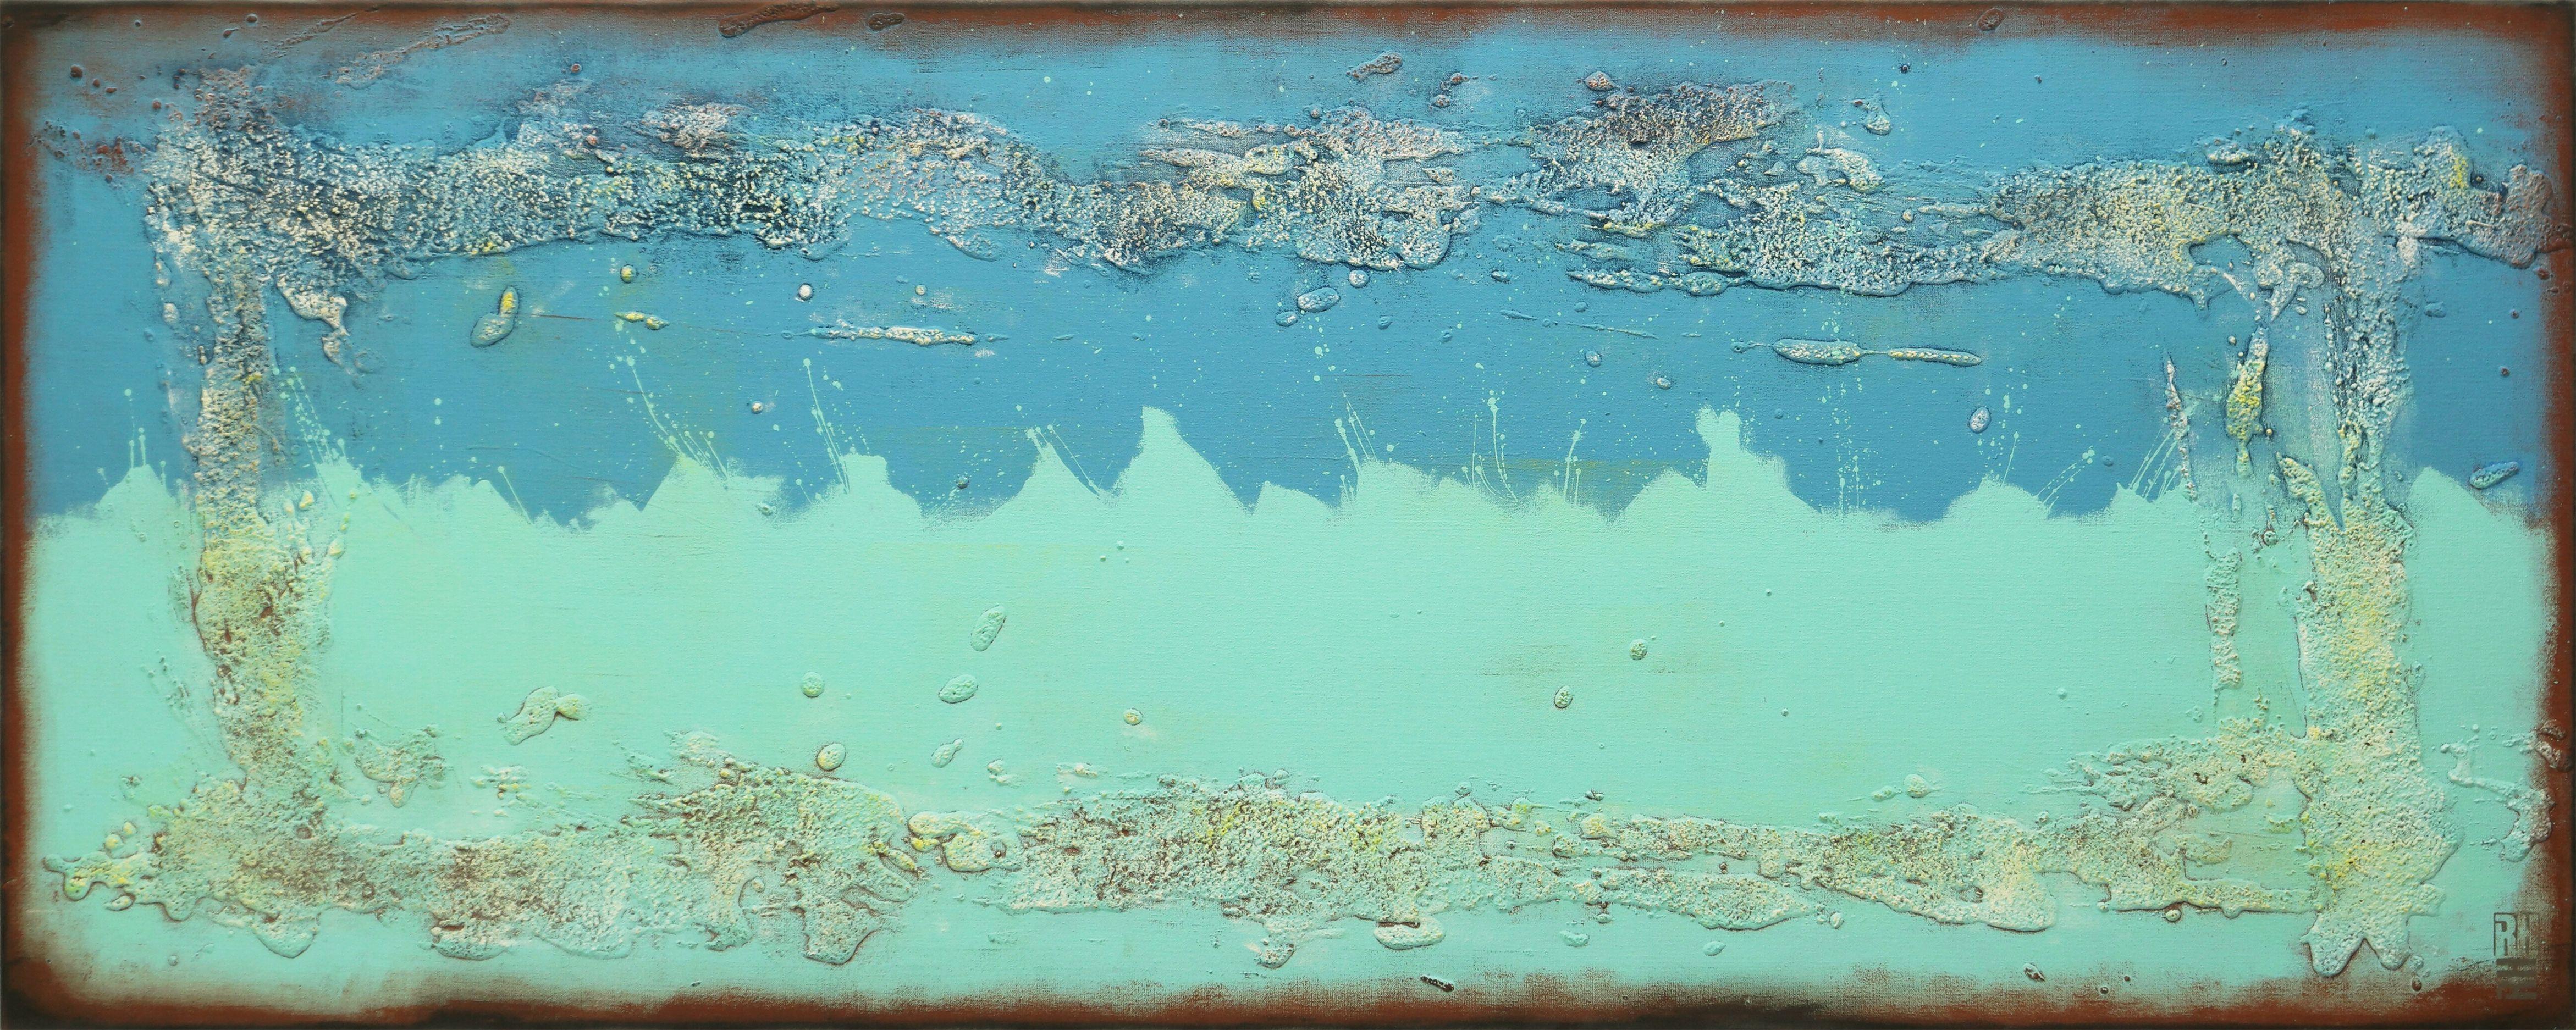 Ronald Hunter Abstract Painting - Once Twice Turquoise Landscape, Painting, Acrylic on Canvas